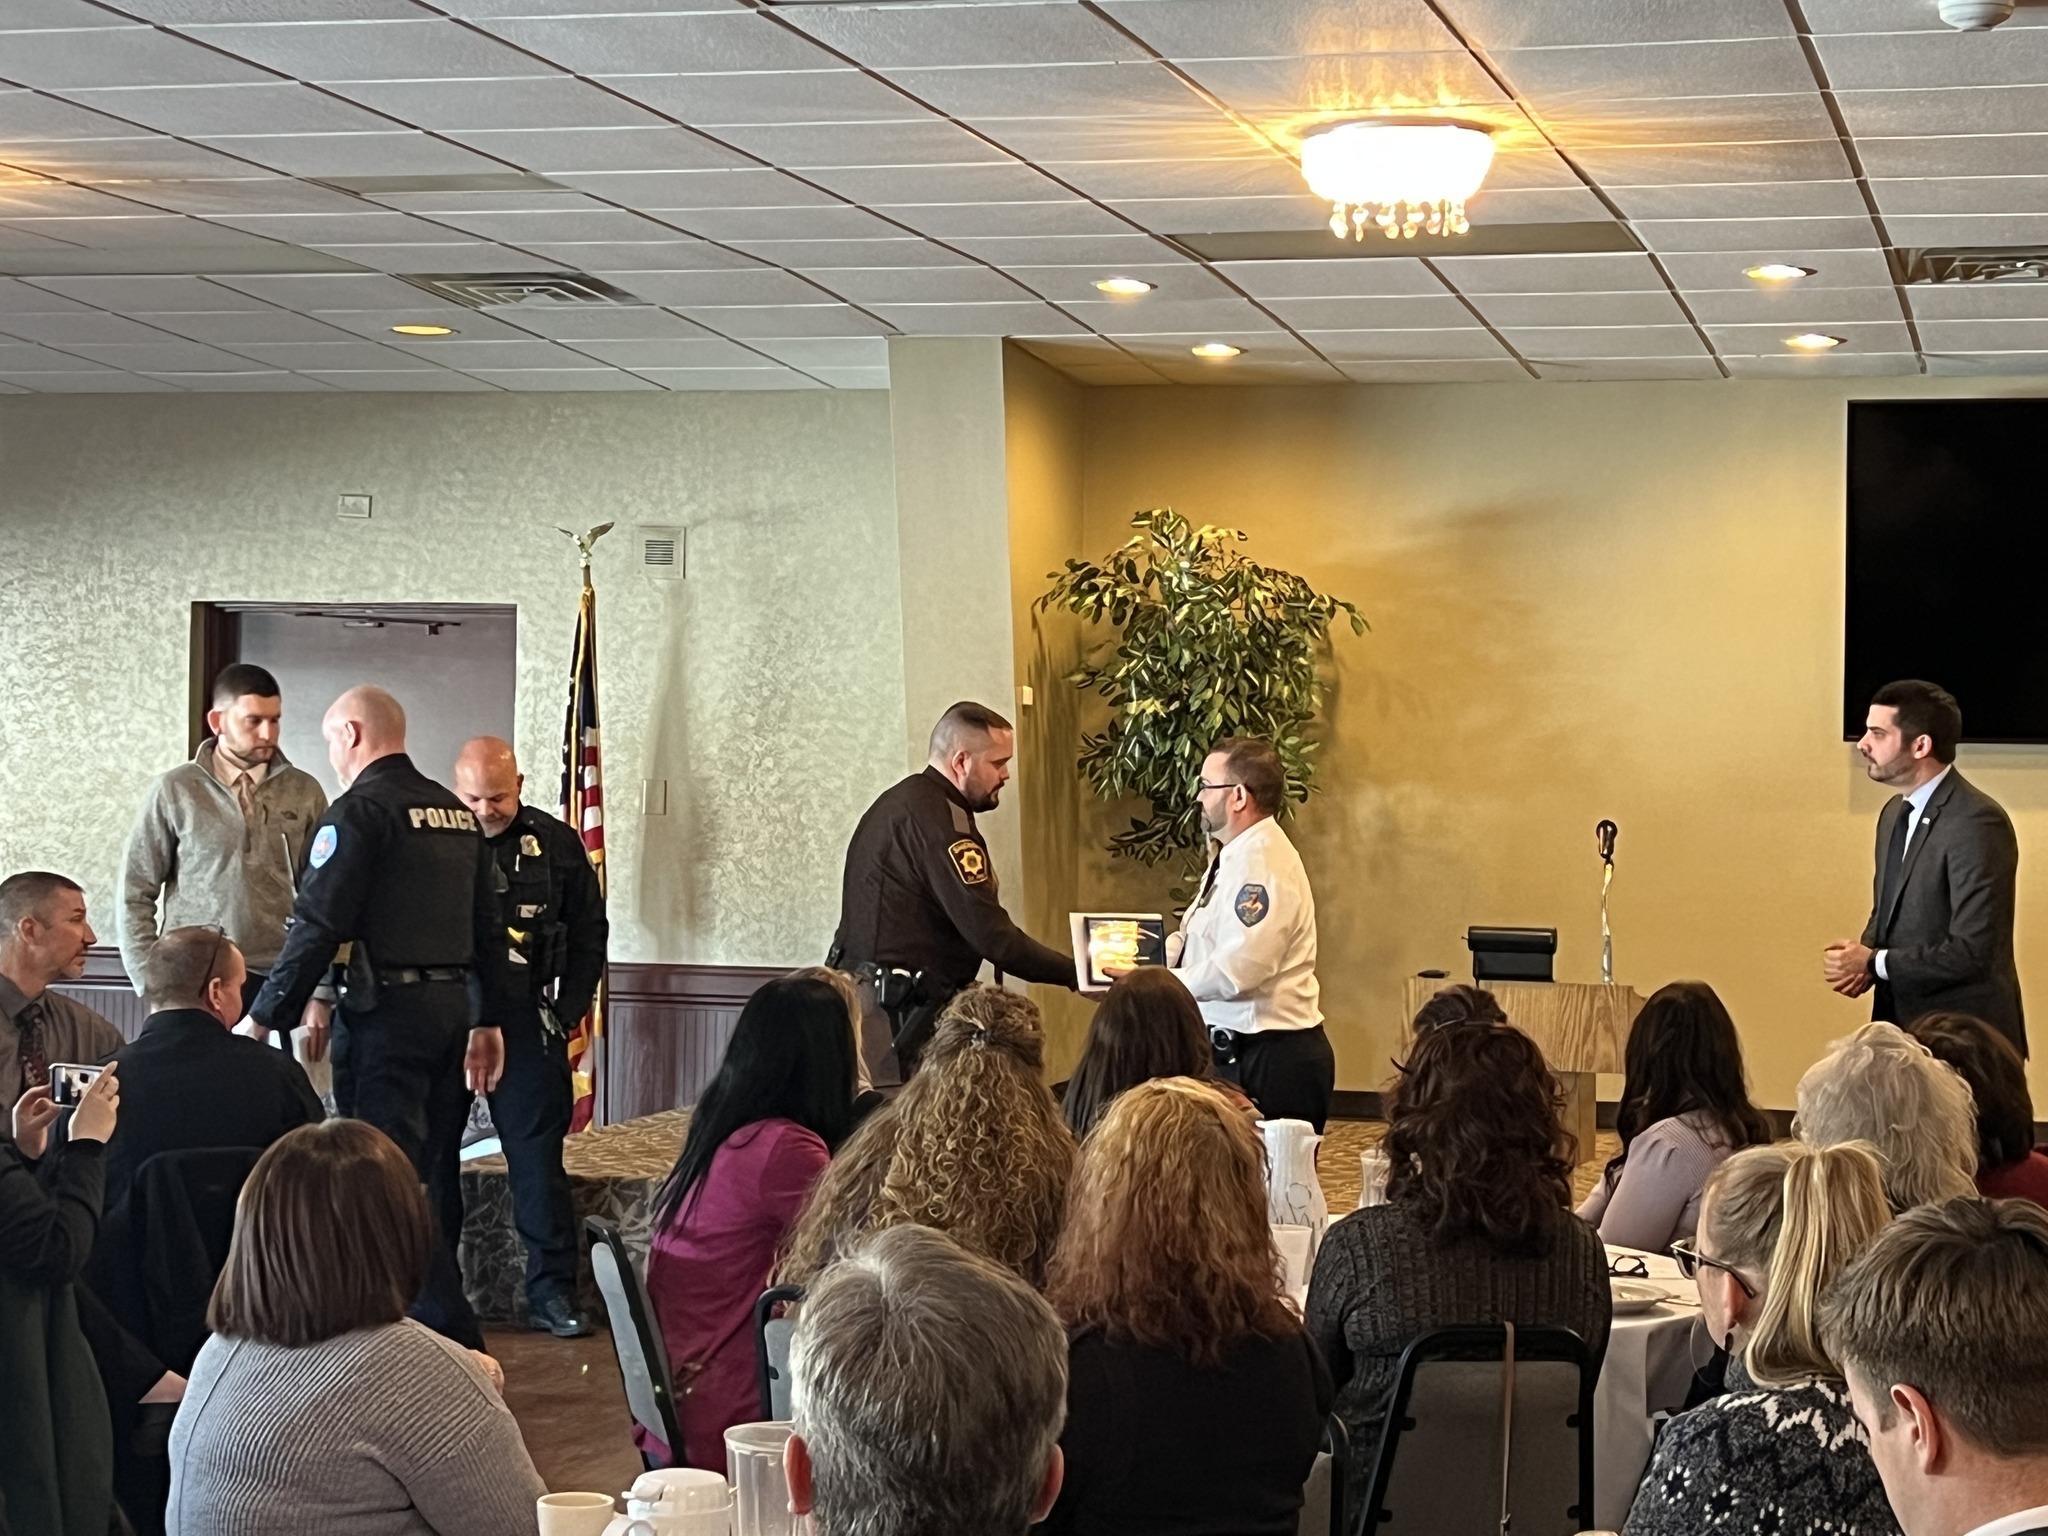 Officers And Citizen Receive Awards At Annual Awards Luncheon - KFIZ ...